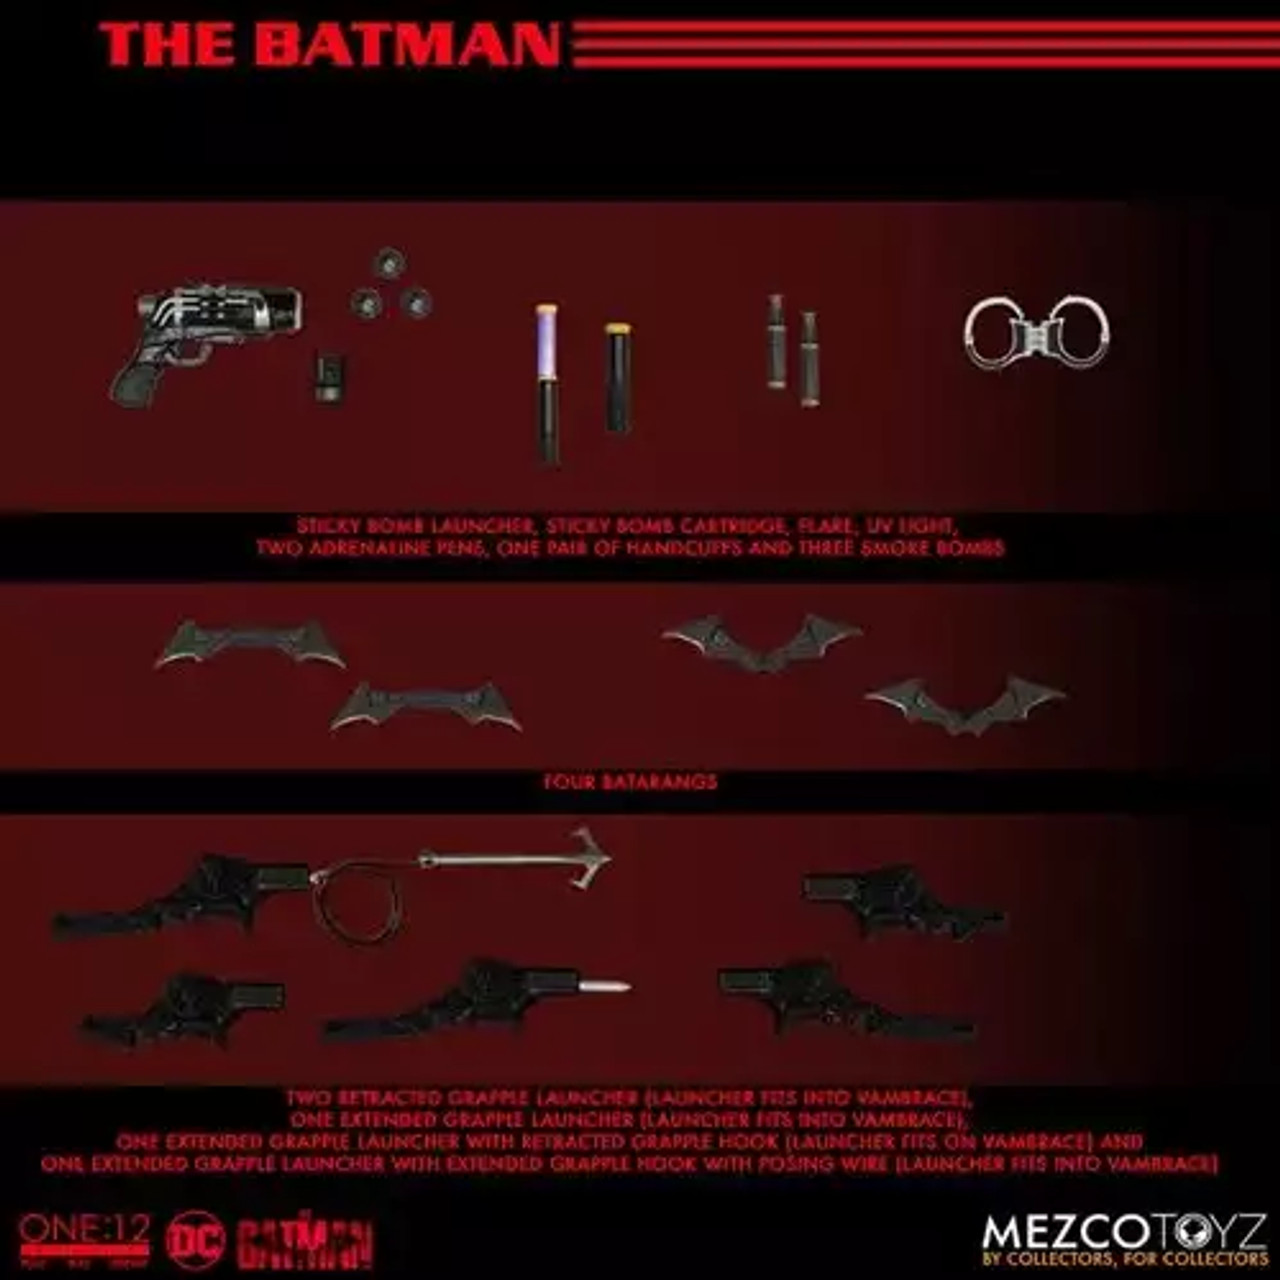 https://cdn11.bigcommerce.com/s-8j9ytfqbd1/images/stencil/1280x1280/products/414/5830/The-Batman-One12-Collective-Action-Figure_1470__40384.1687286268.jpg?c=1?imbypass=on